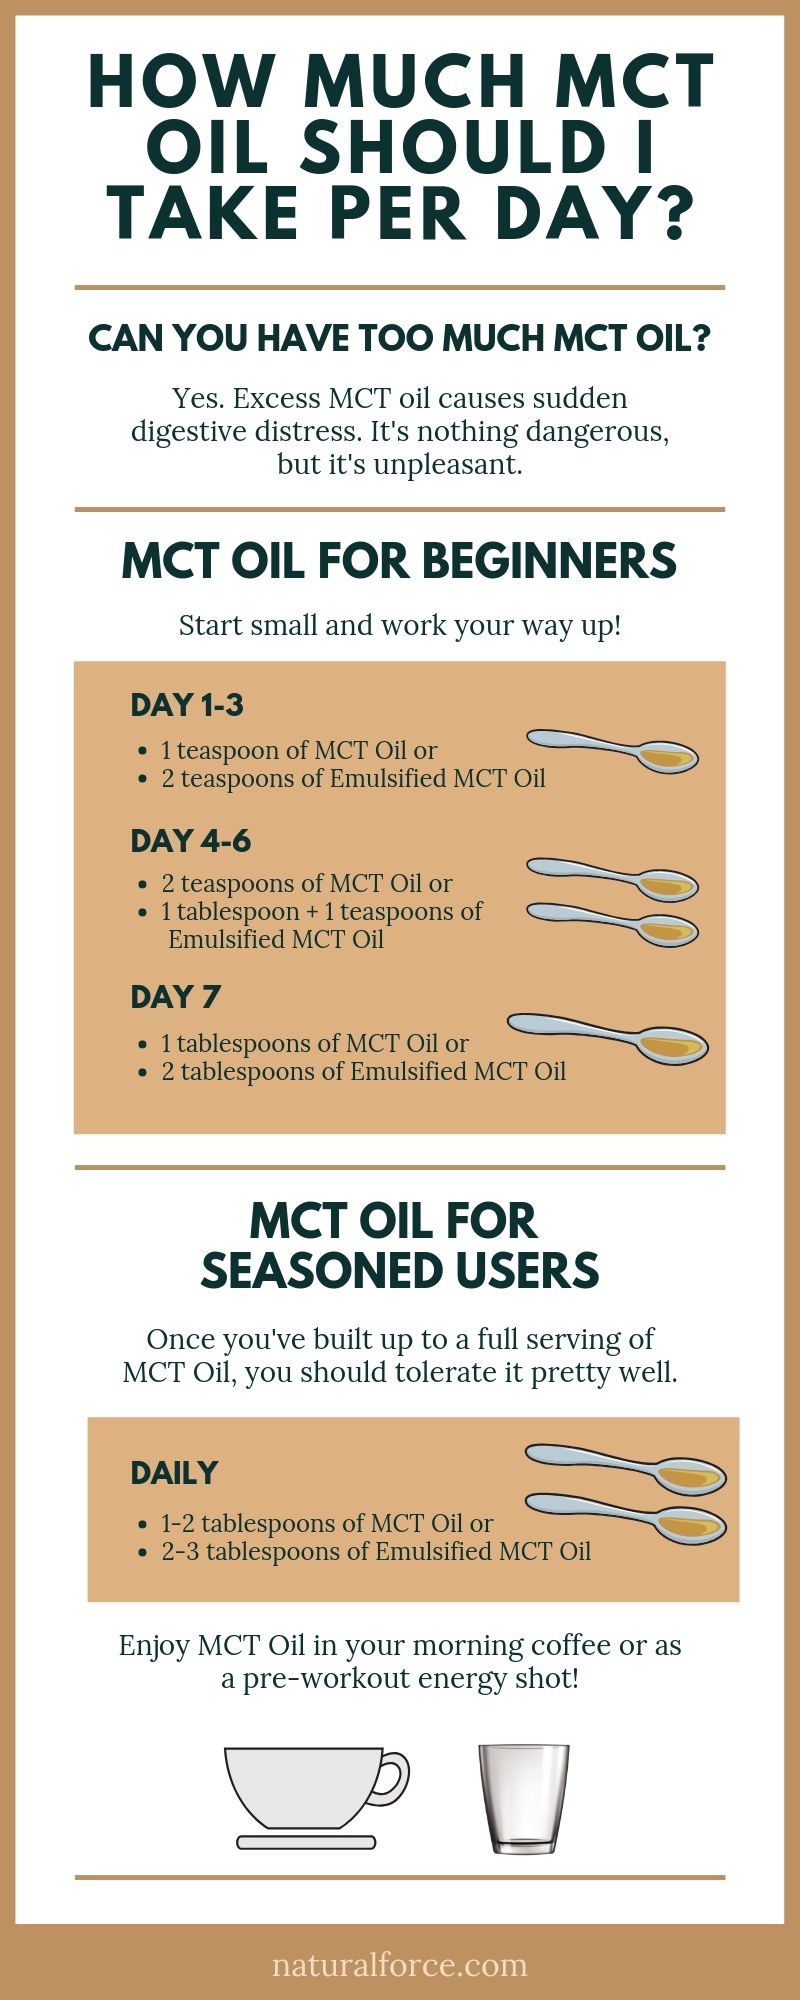 How much mct oil to take per day infographic